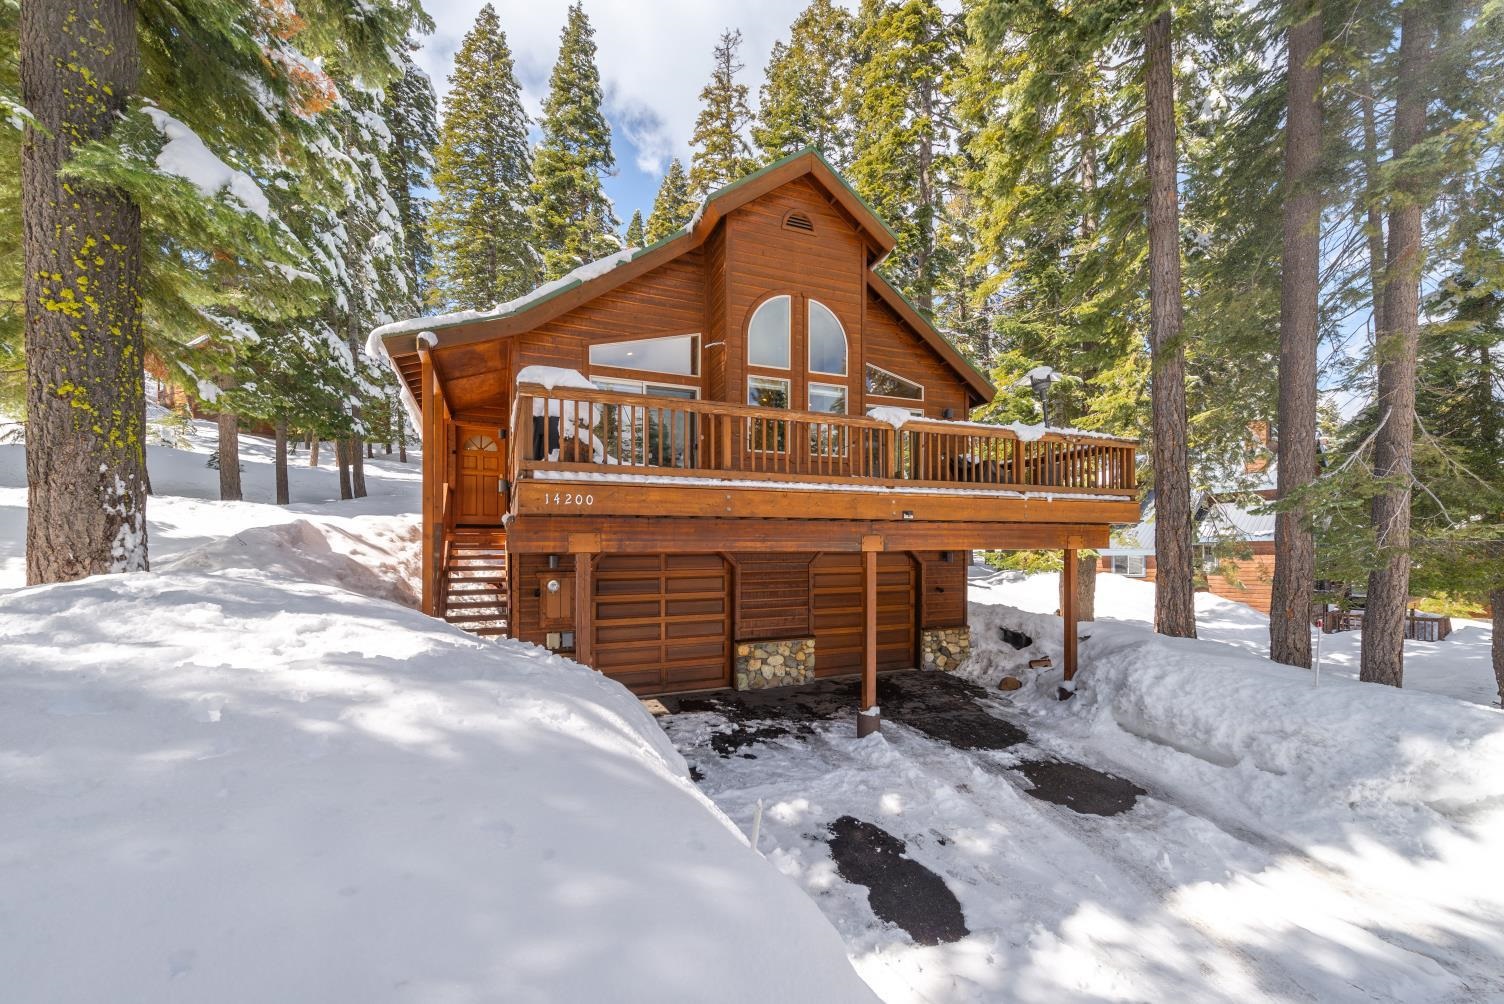 Image for 14200 Pathway Avenue, Truckee, CA 96161